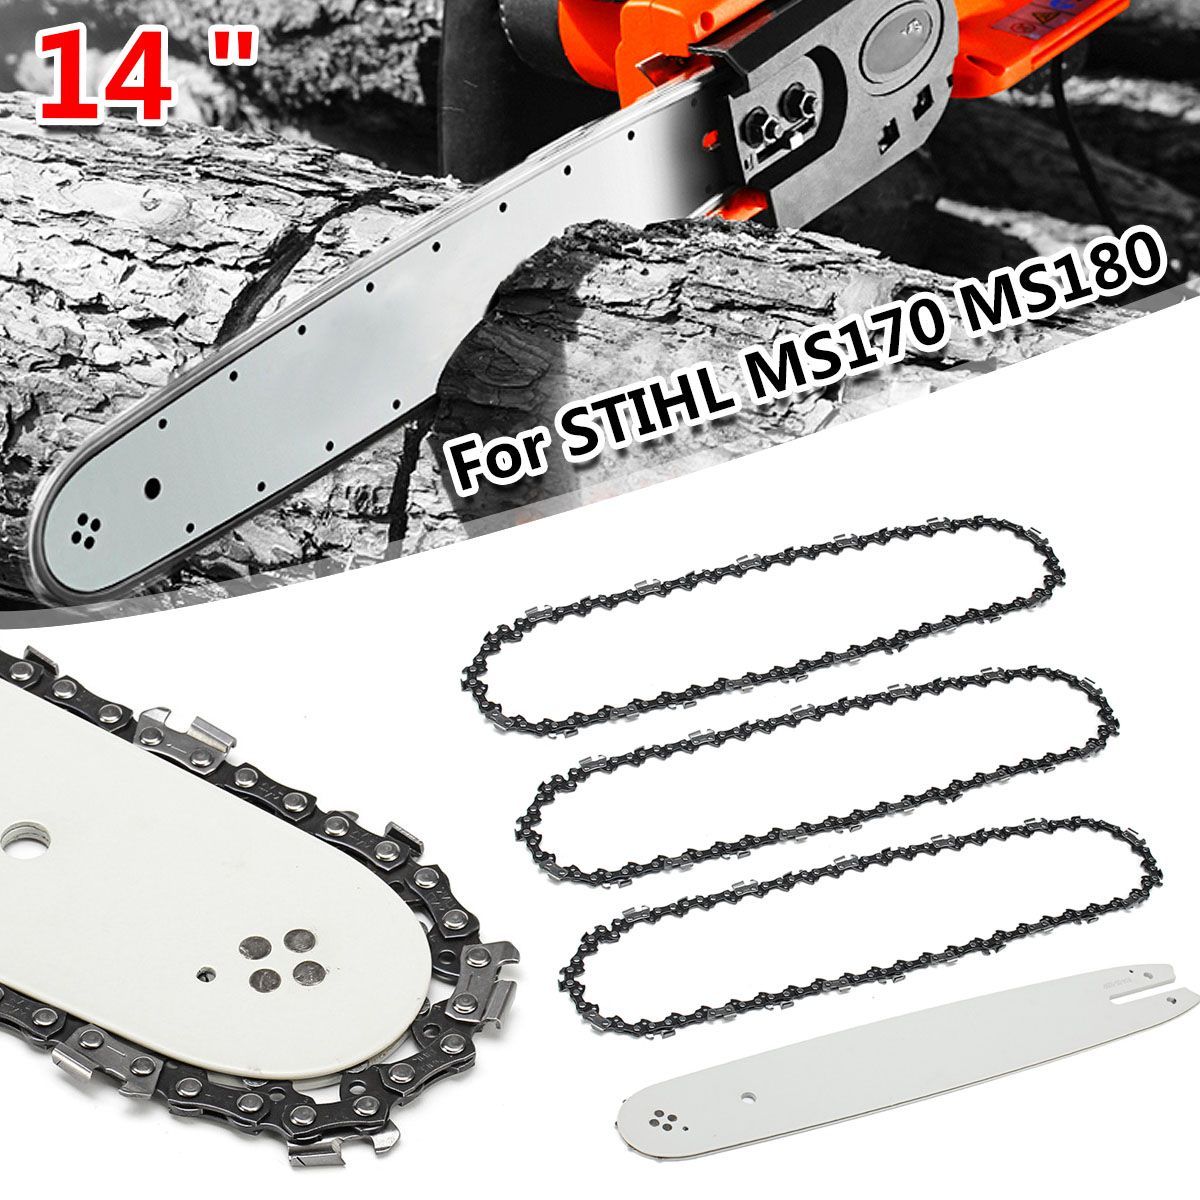 2Pcs 14" Chainsaw Guide Bar 3/8 LP 50DL Saw Chain For STIHL MS170 MS180 MS190 